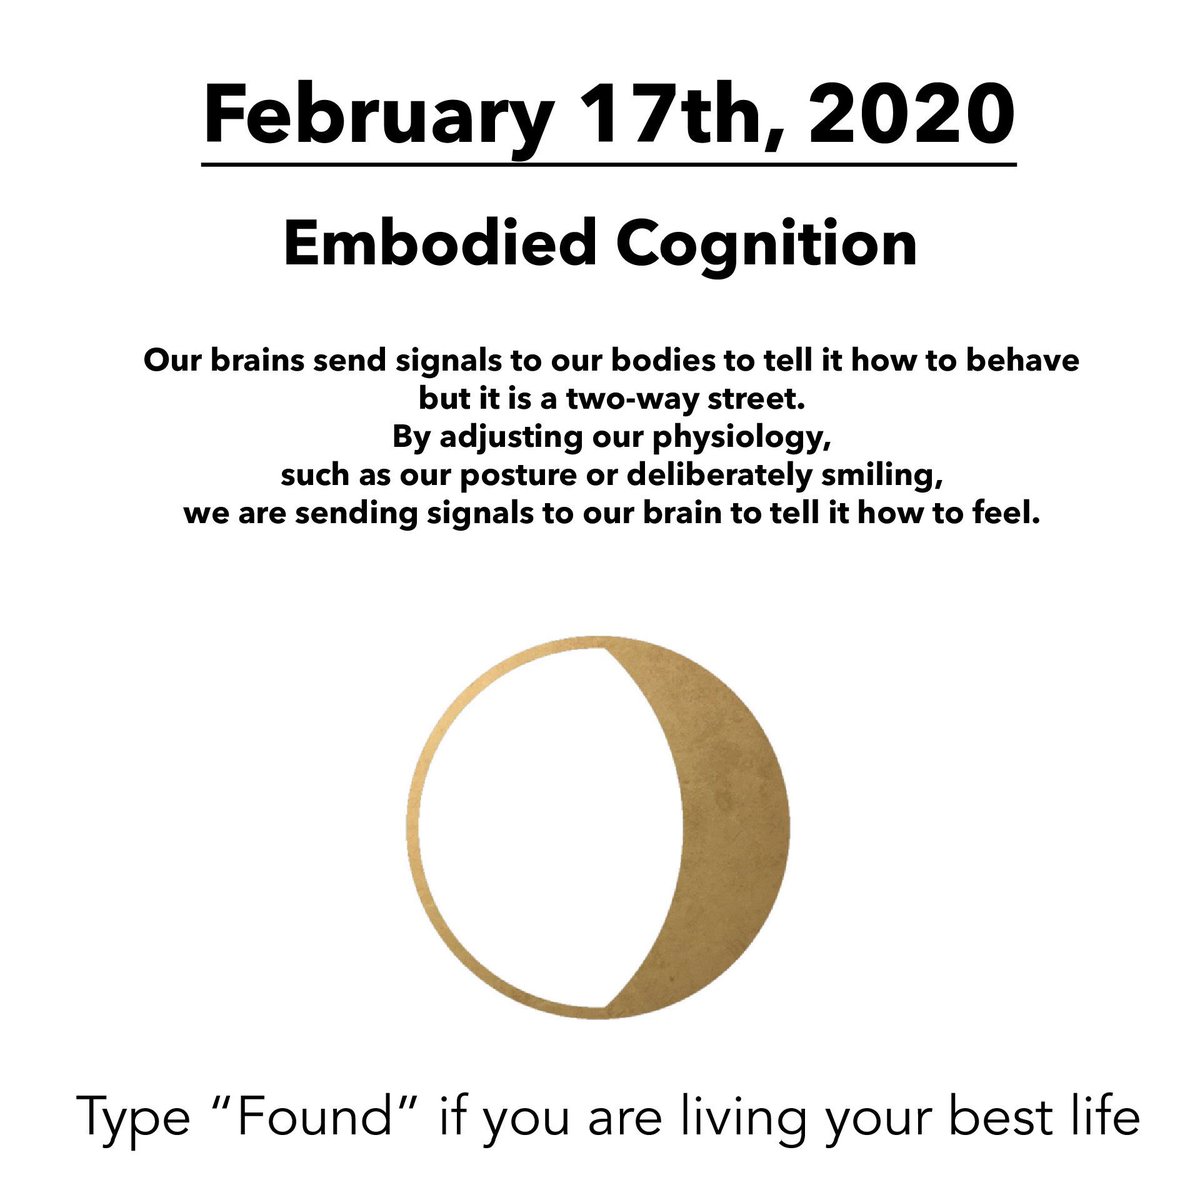 In philosophy, embodied cognition holds that an agent's cognition is strongly influenced by aspects of an agent's body beyond the brain itself.

#EmbodiedCognition #WeareFound #BrainScience #Philosophy #MentalHealth